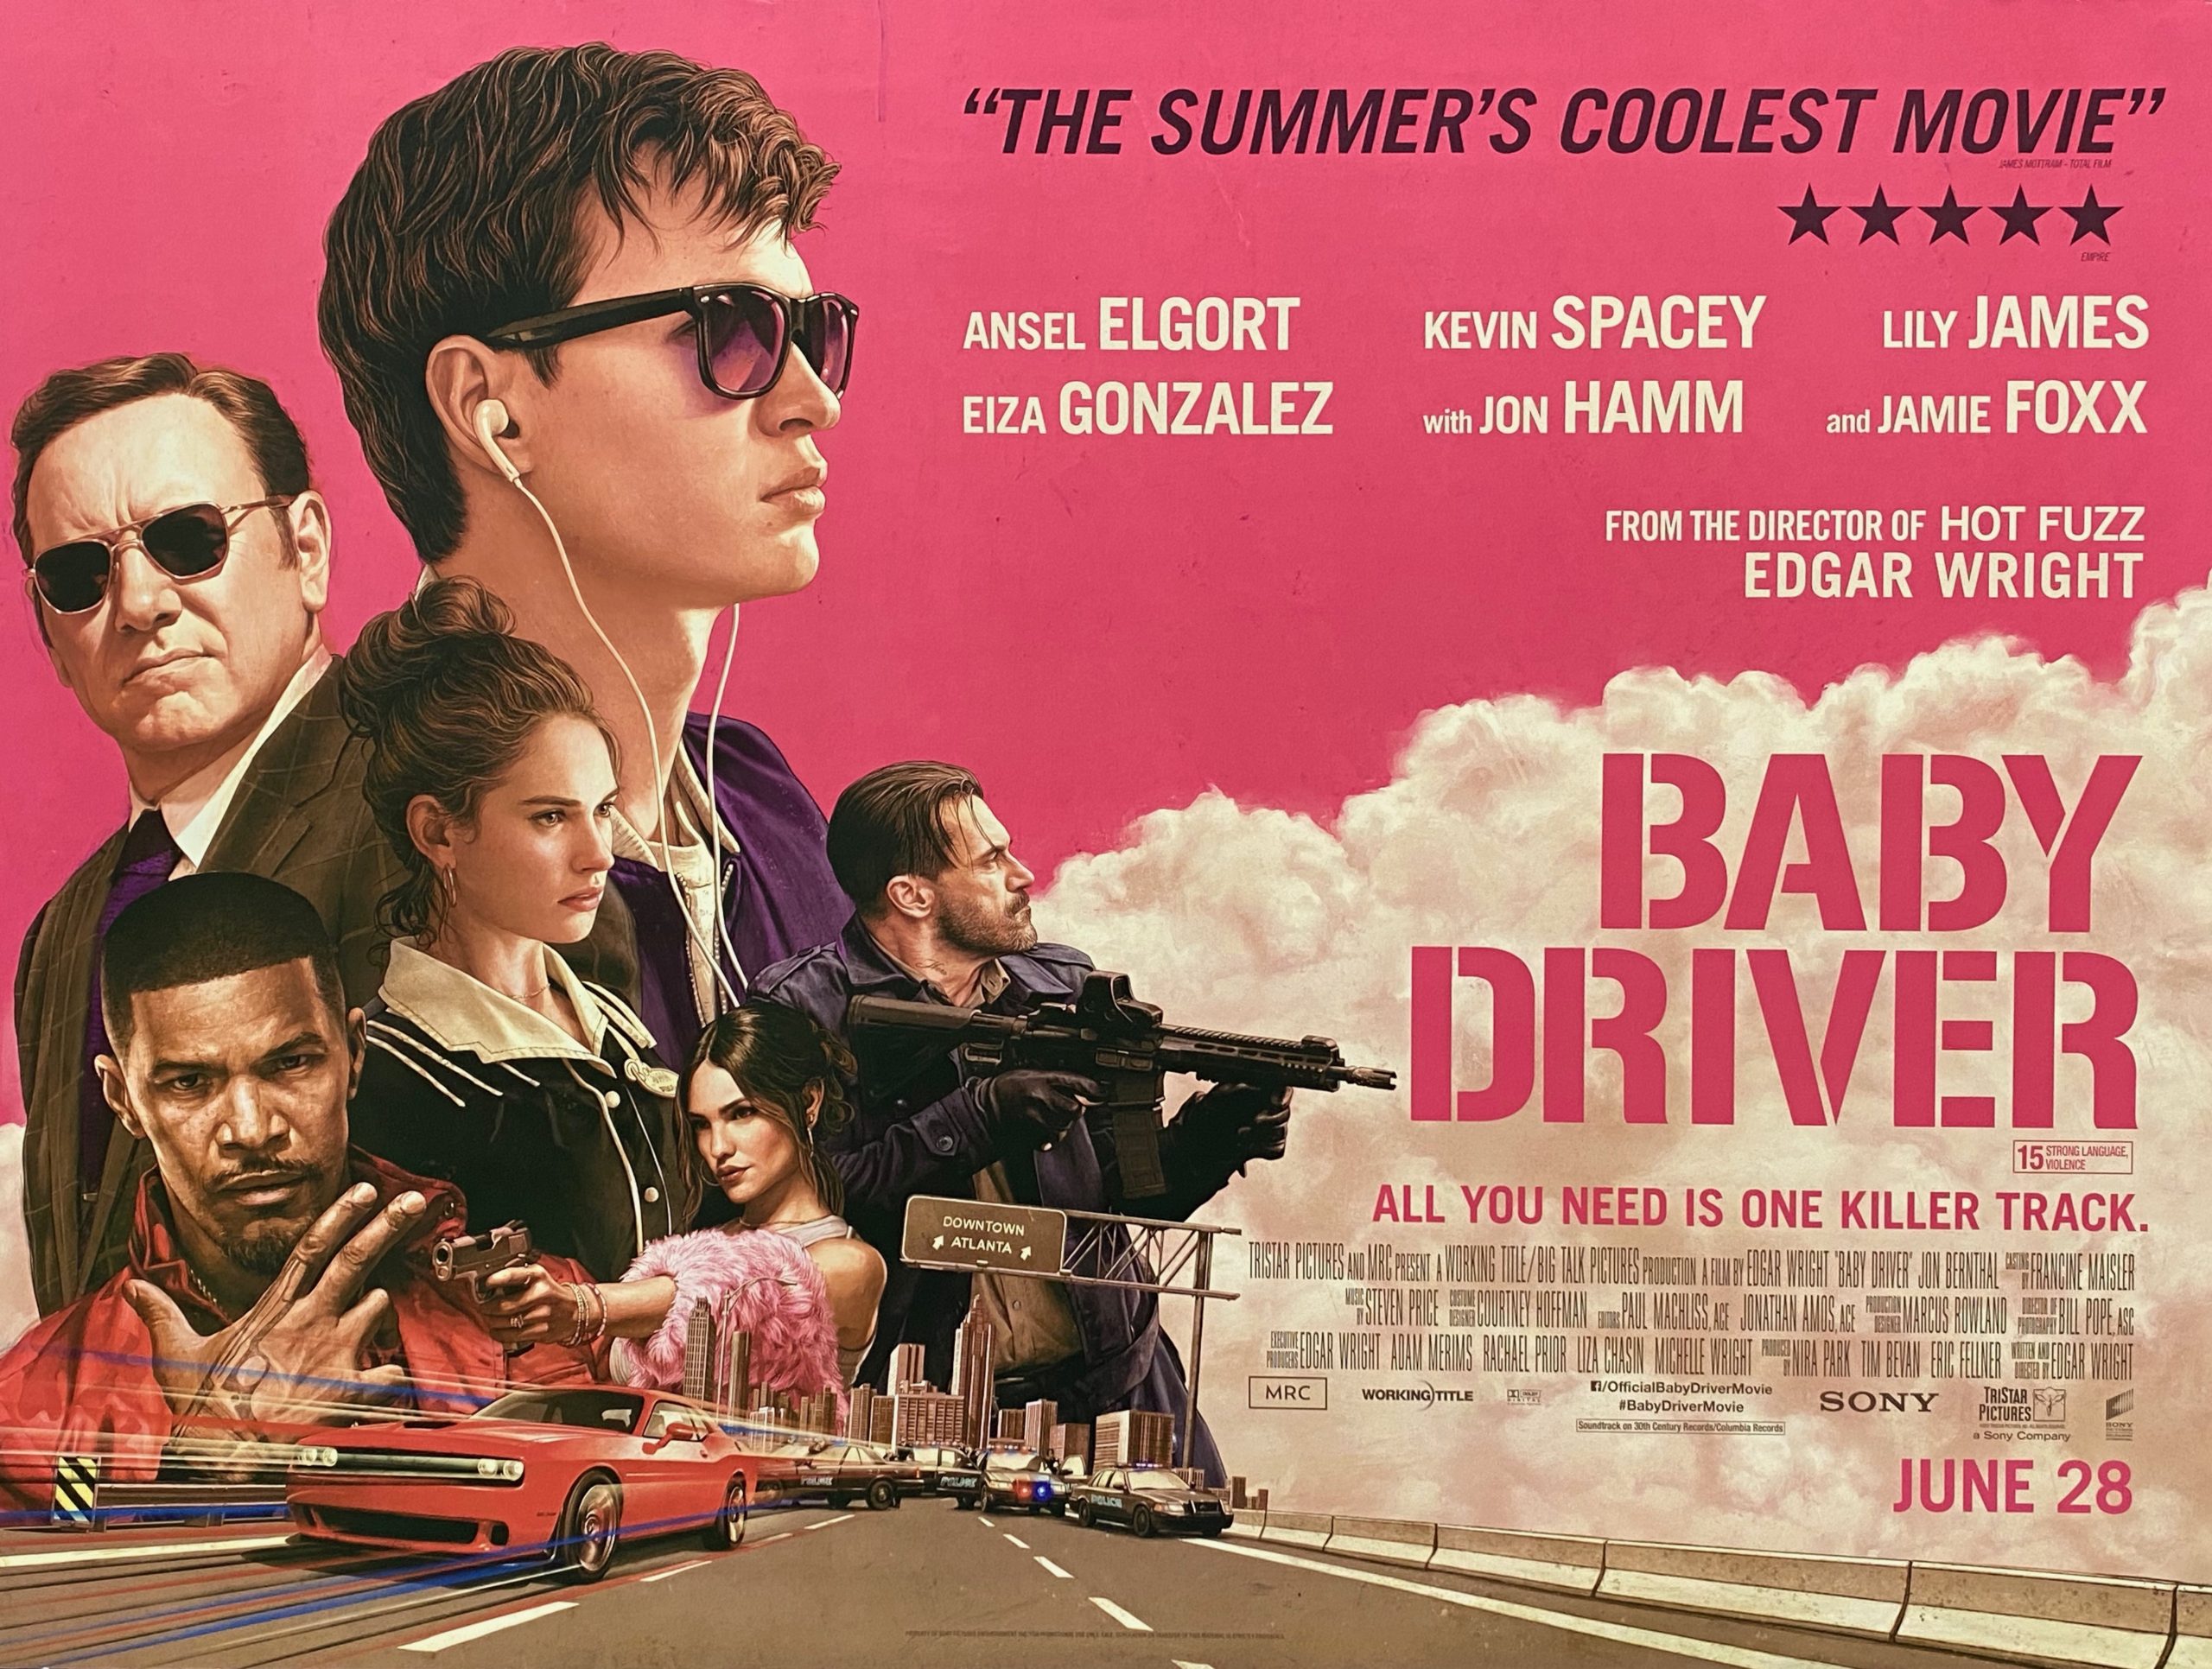 BABY DRIVER TEXTLESS GUN POSTER A4 A3 A2 A1 CINEMA MOVIE LARGE FORMAT #1 